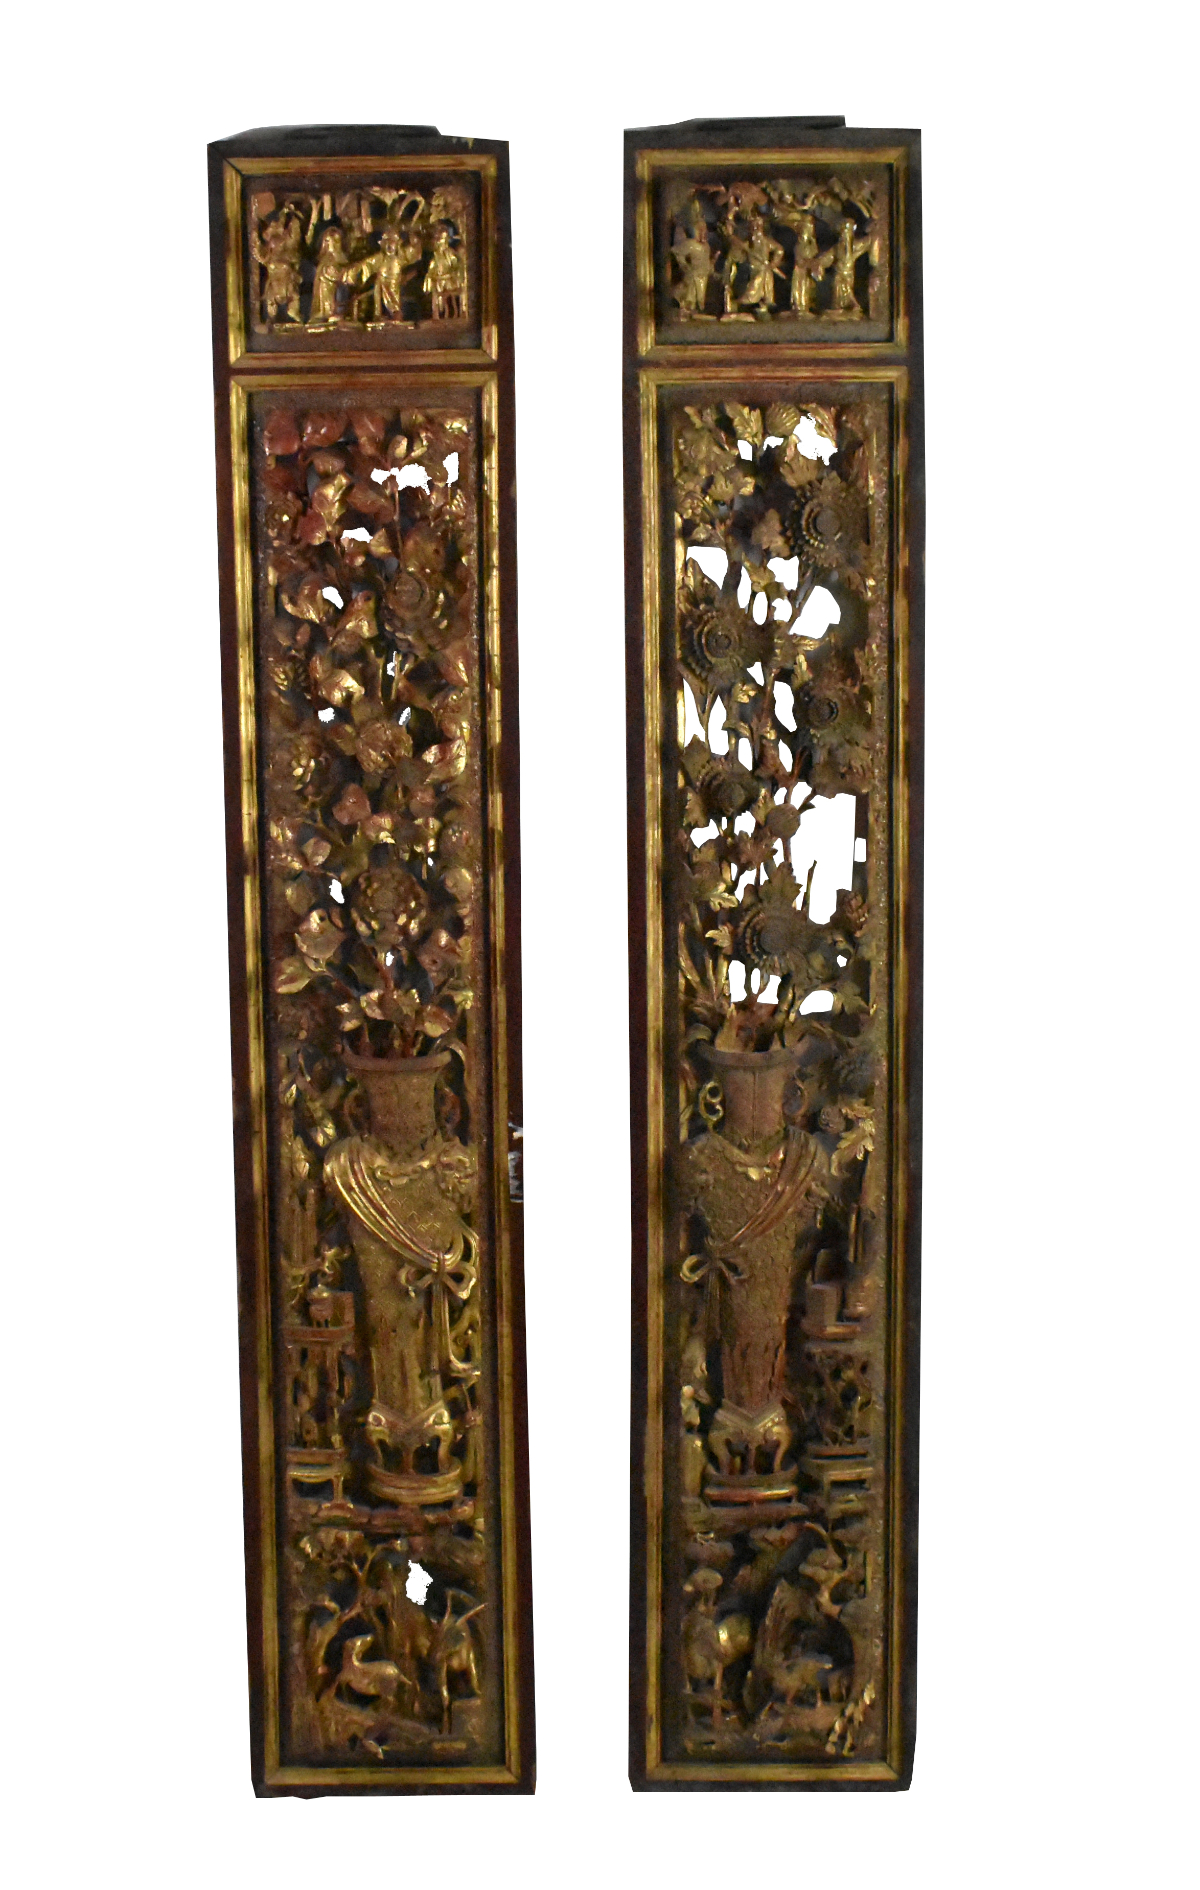 PAIR OF CHINESE LACQUERWARE PANEL  301d2f